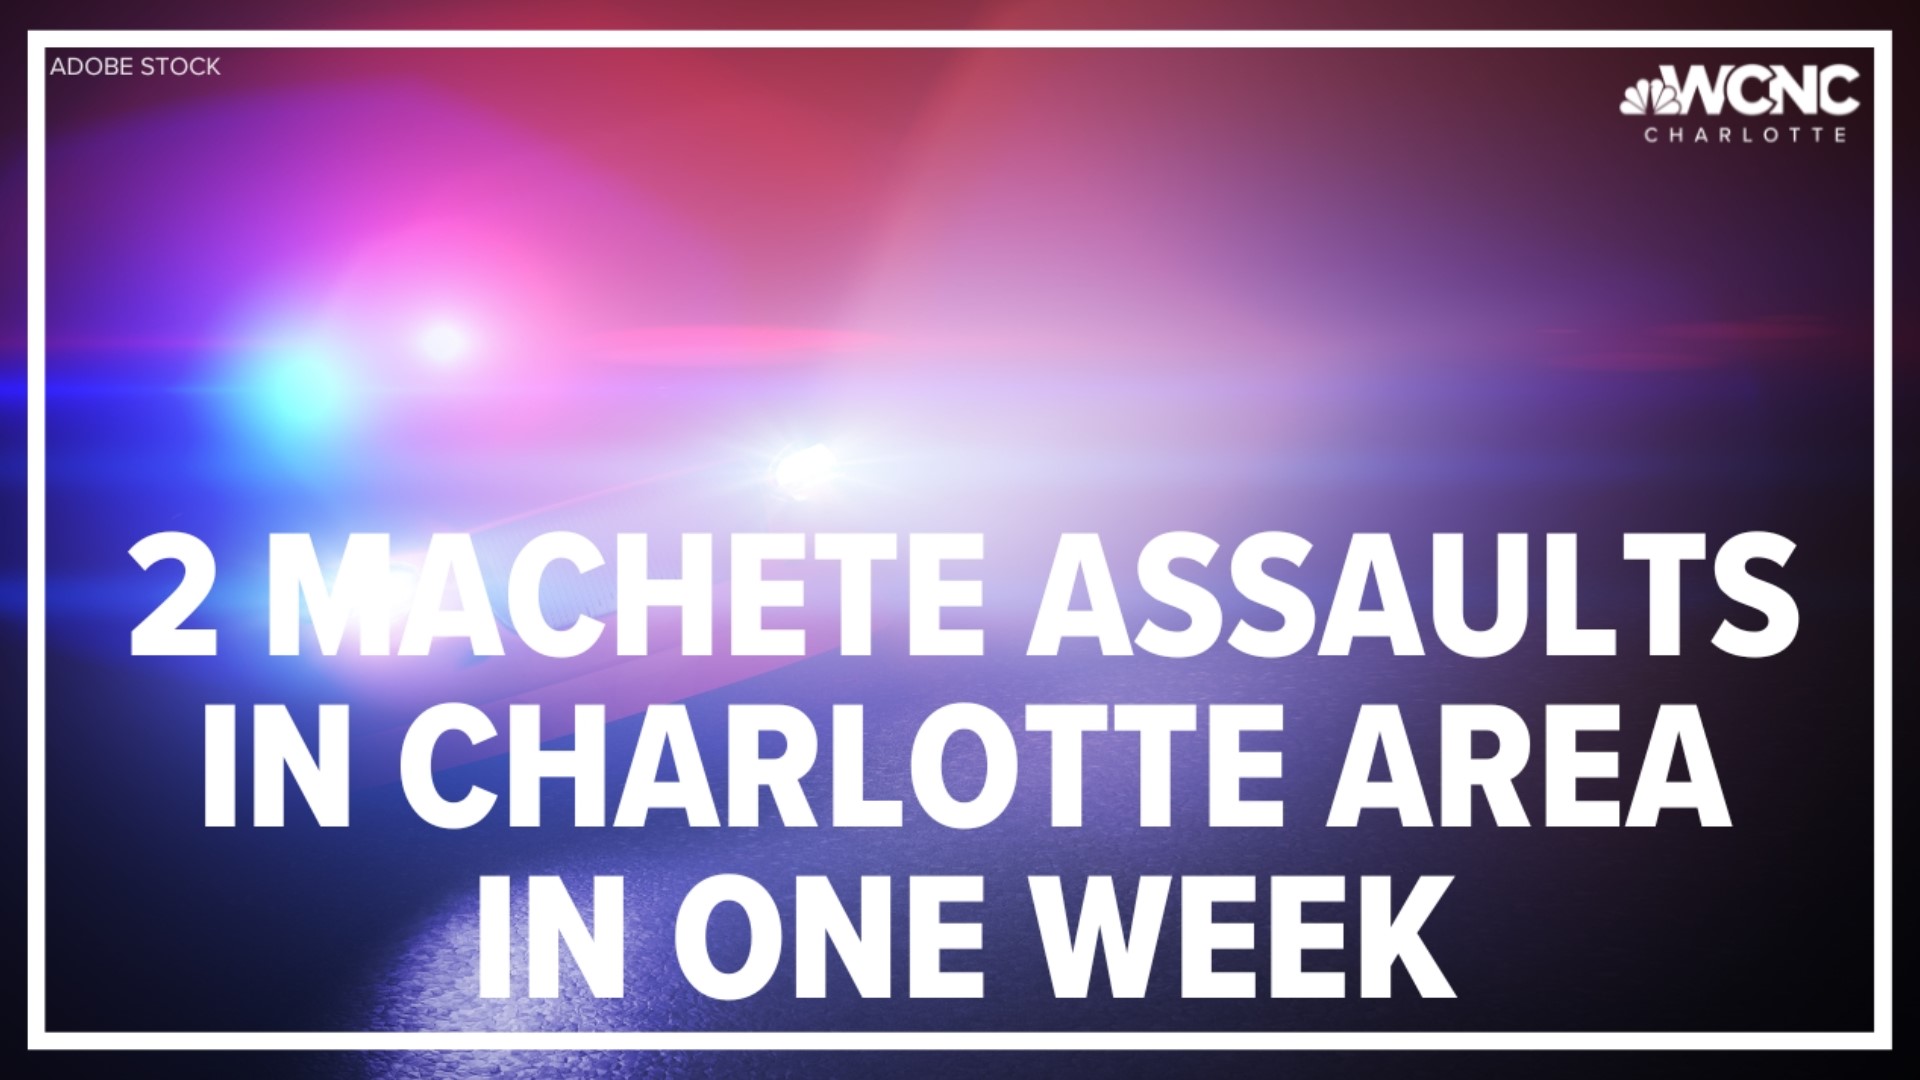 On Friday, deputies responded to a machete assault in Iredell County. On Tuesday, Gastonia police responded to a separate machete assault.